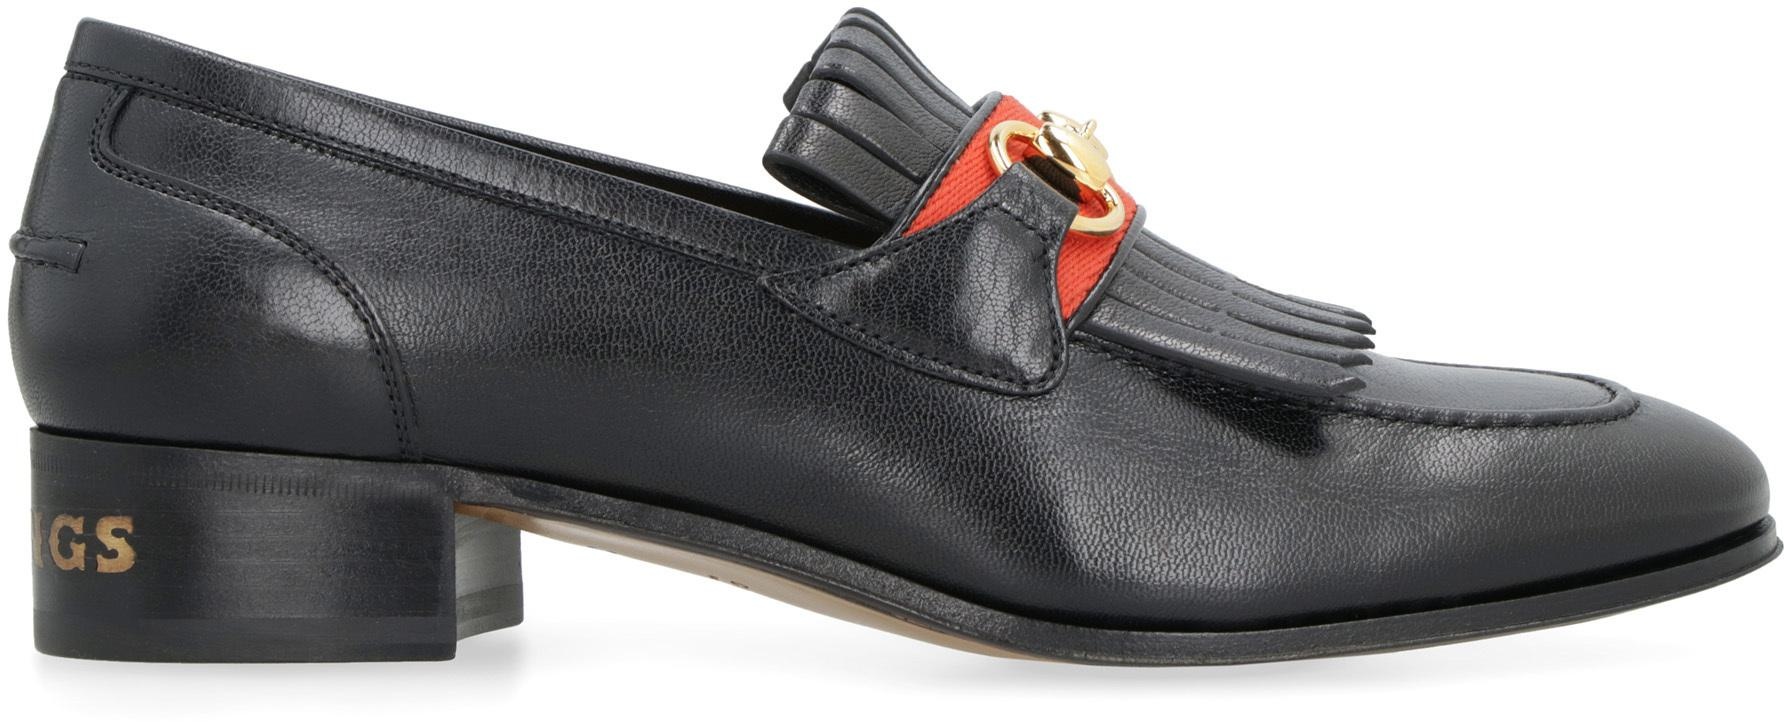 GUCCI HORSEBIT LEATHER LOAFERS - 2